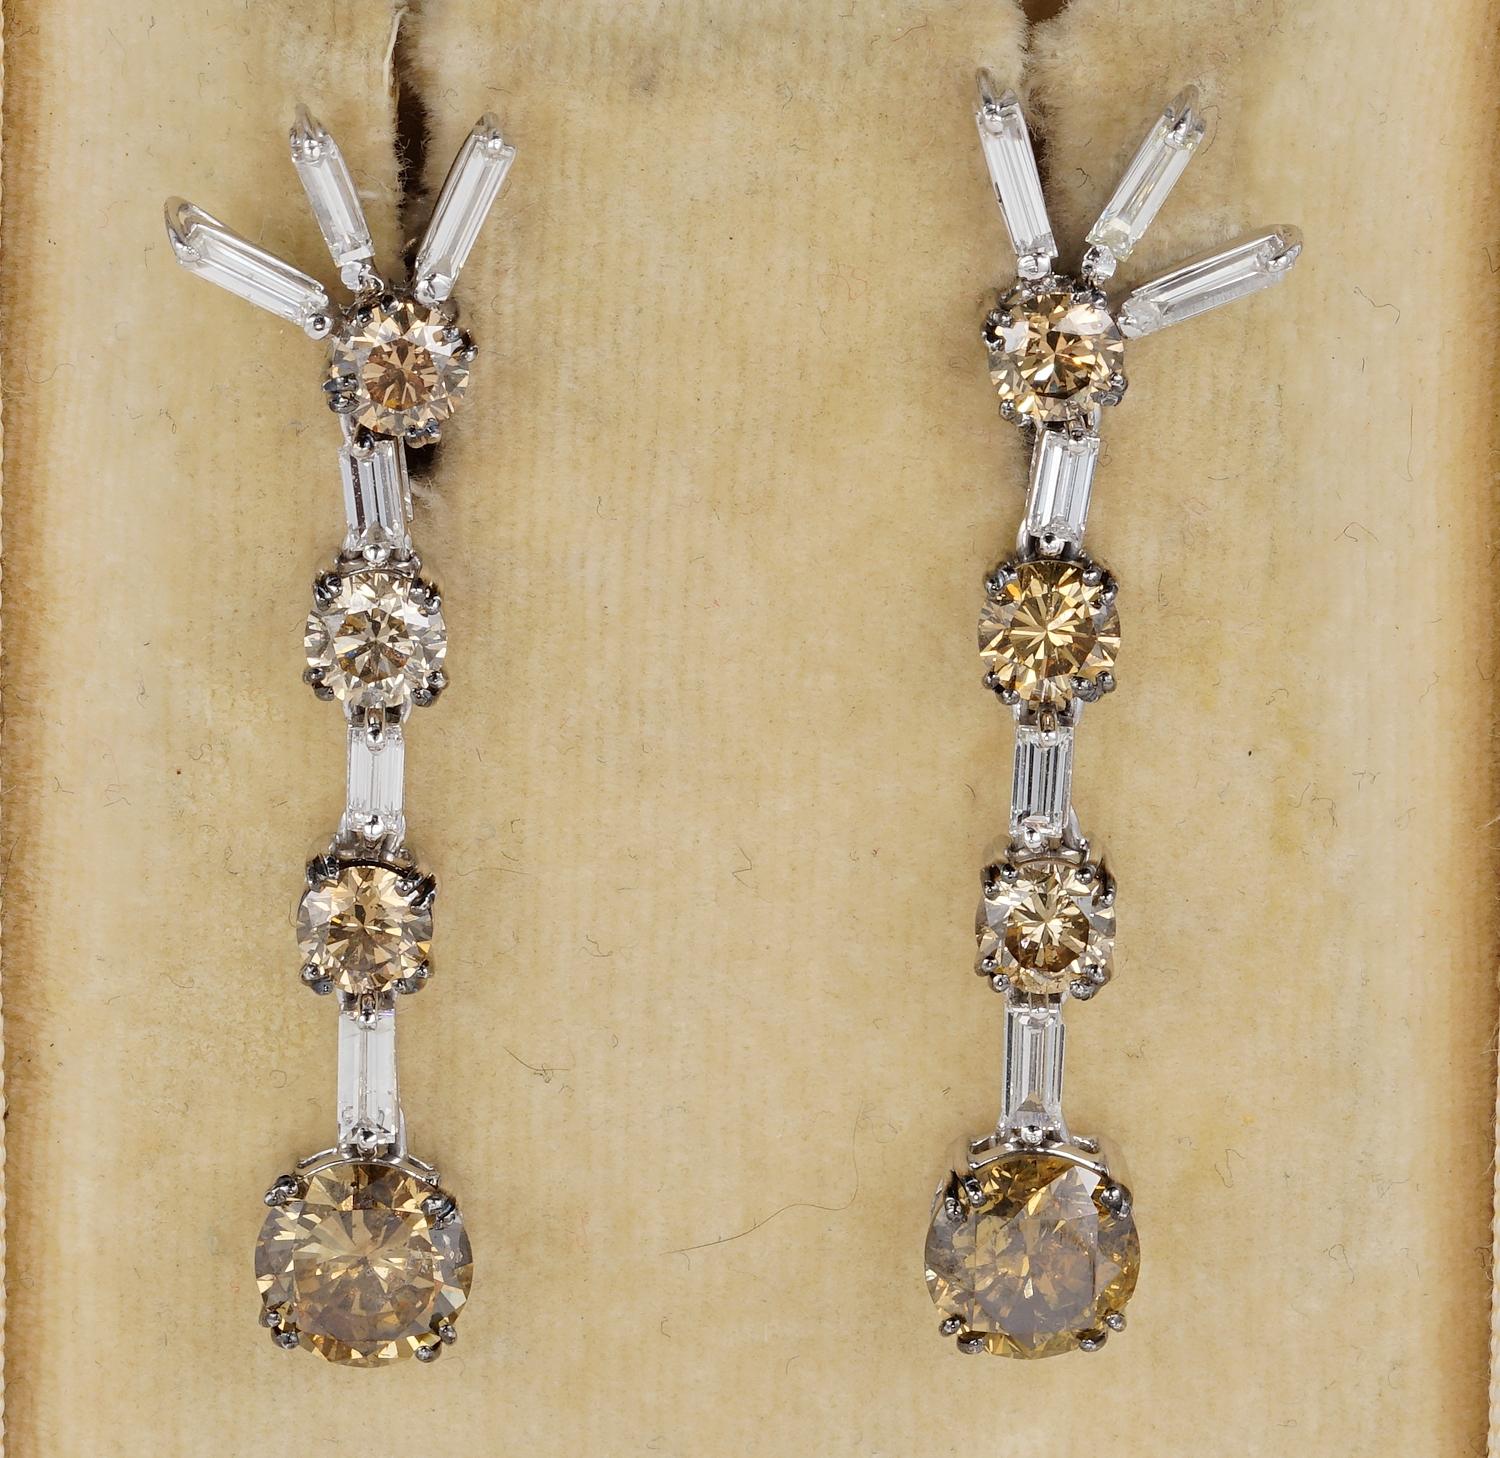 An extraordinary pair of natural Fancy Coloured Diamond drop earrings dating 50's.
Diamonds come in many colours,these are of amazing cinnamon or orange Brown all natural and excellent in cut to catch and project the best of natural sparkle all